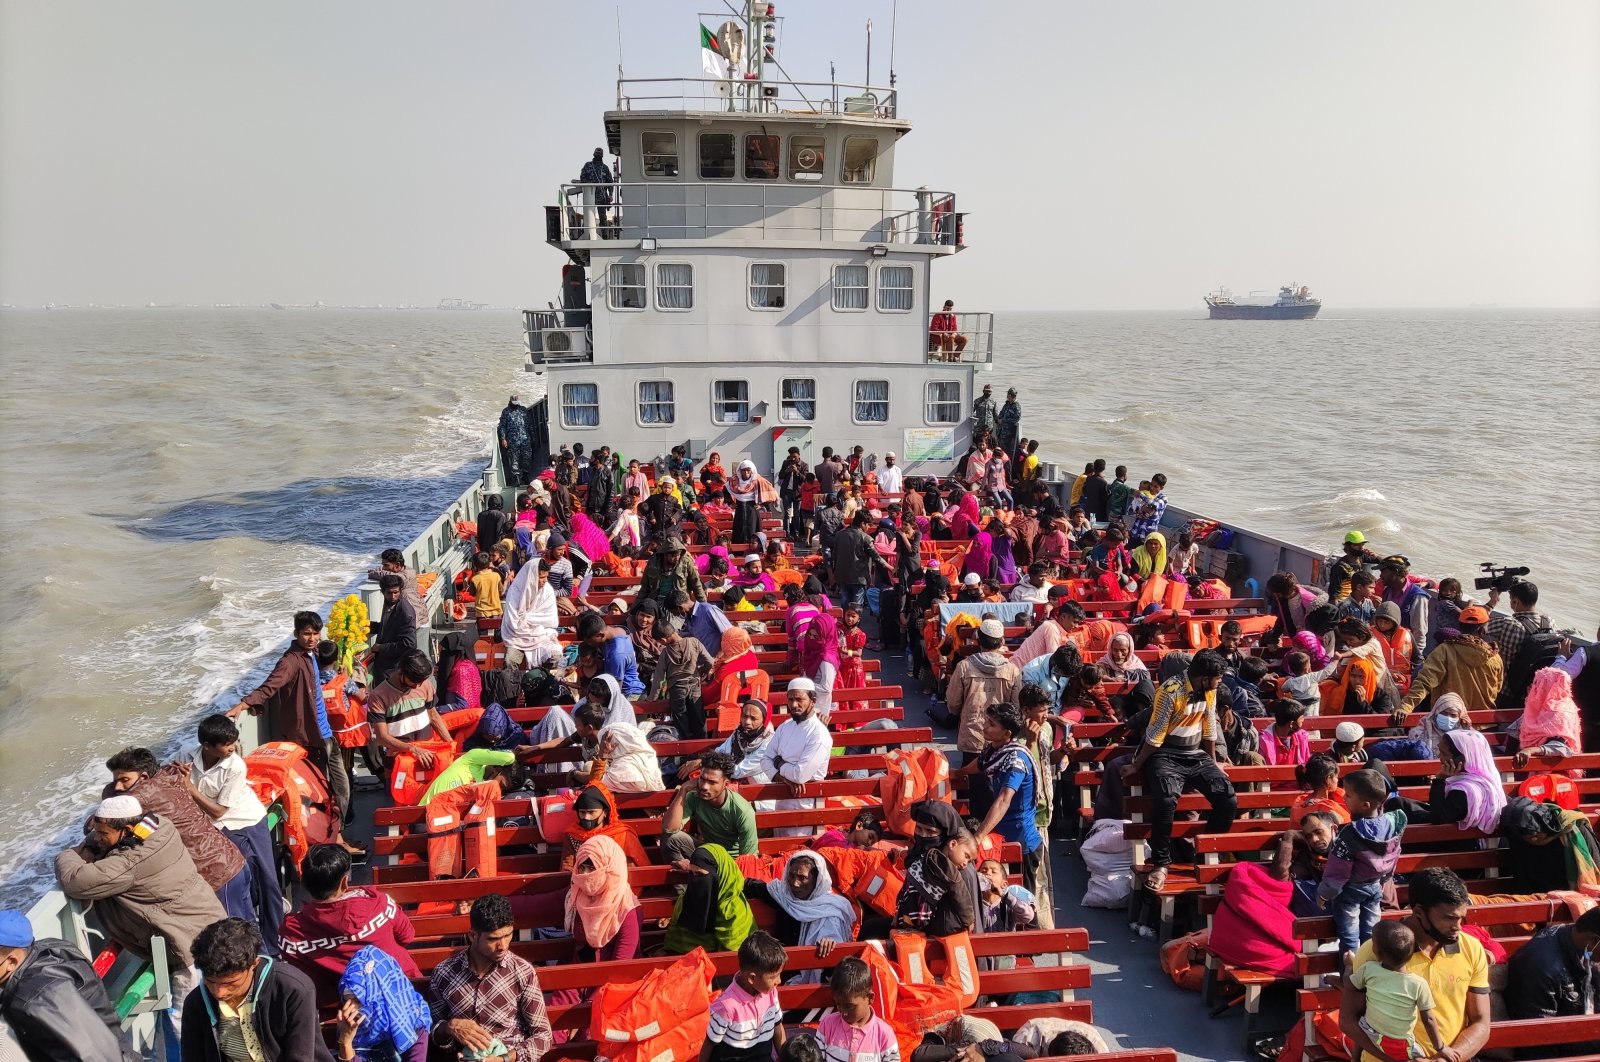 Rohingya refugees travel in a naval ship to be transported to an isolated island in the Bay of Bengal, in Chittagong, Bangladesh, Tuesday, Dec. 29, 2020. (AP Photo)